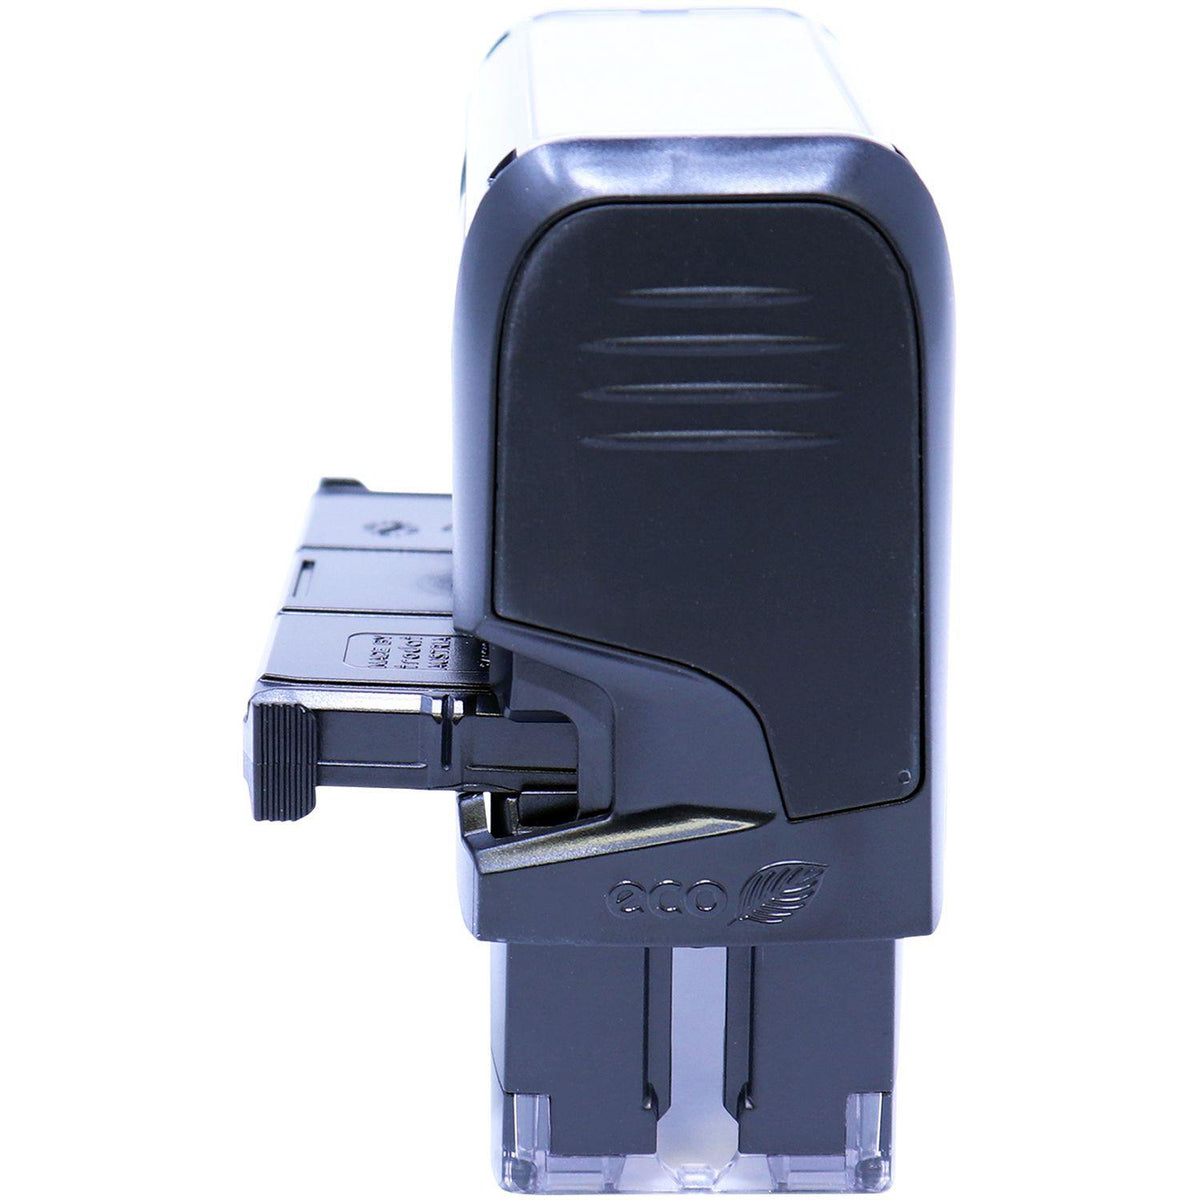 Self Inking Capitation Stamp - Engineer Seal Stamps - Brand_Trodat, Impression Size_Small, Stamp Type_Self-Inking Stamp, Type of Use_Business, Type of Use_Finance, Type of Use_Medical Office, Type of Use_Office